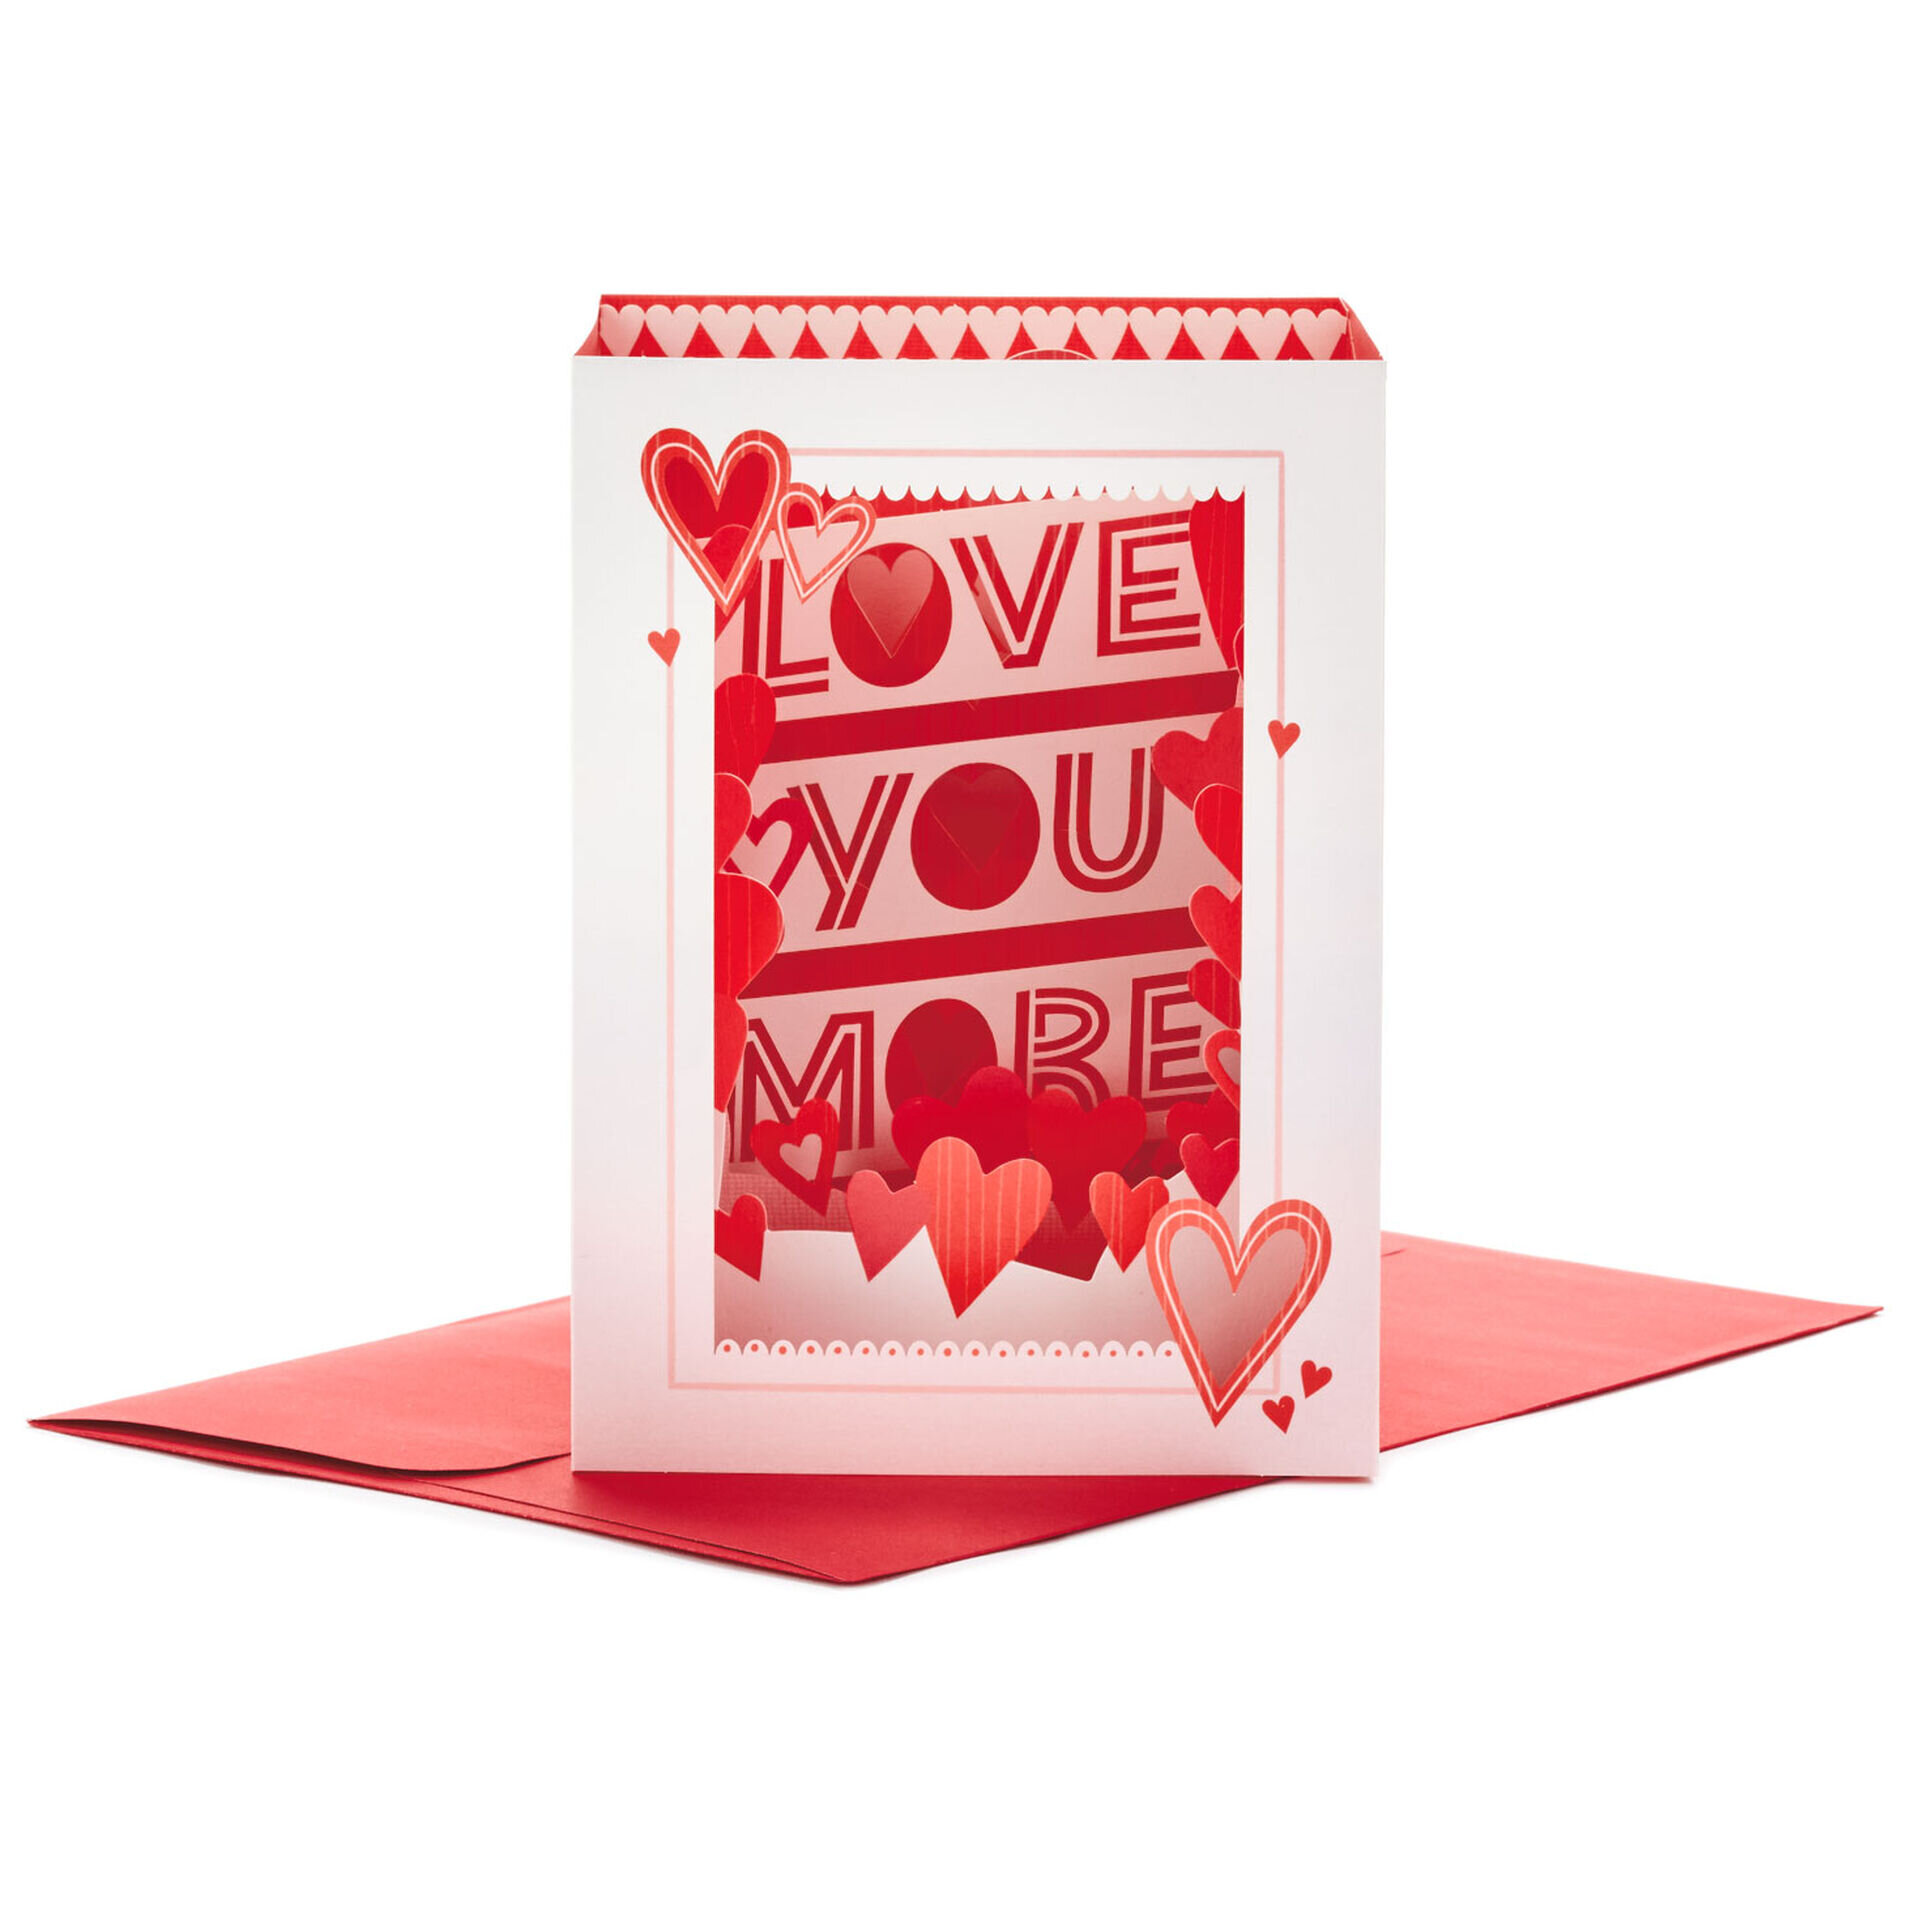 Love-You-More-Hearts-Box-3D-PopUp-Valentines-Day-Card_899VWF1141_01.jpg